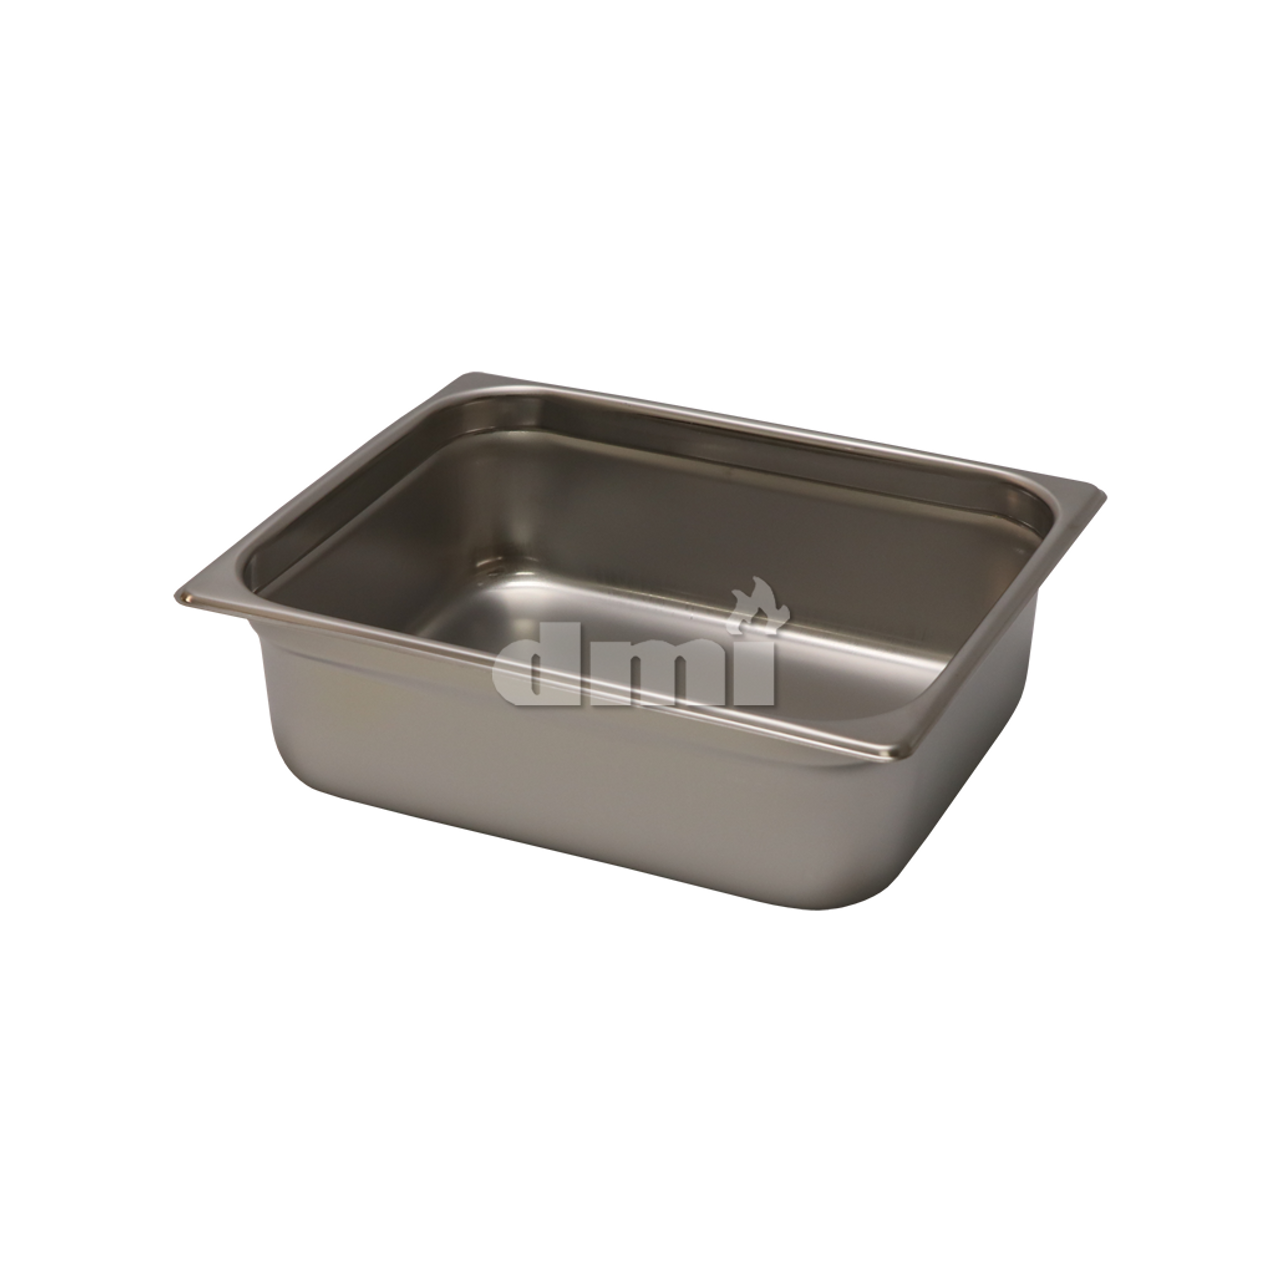 8762-4  1/2 Size Stainless Steel Pan, 4" Deep